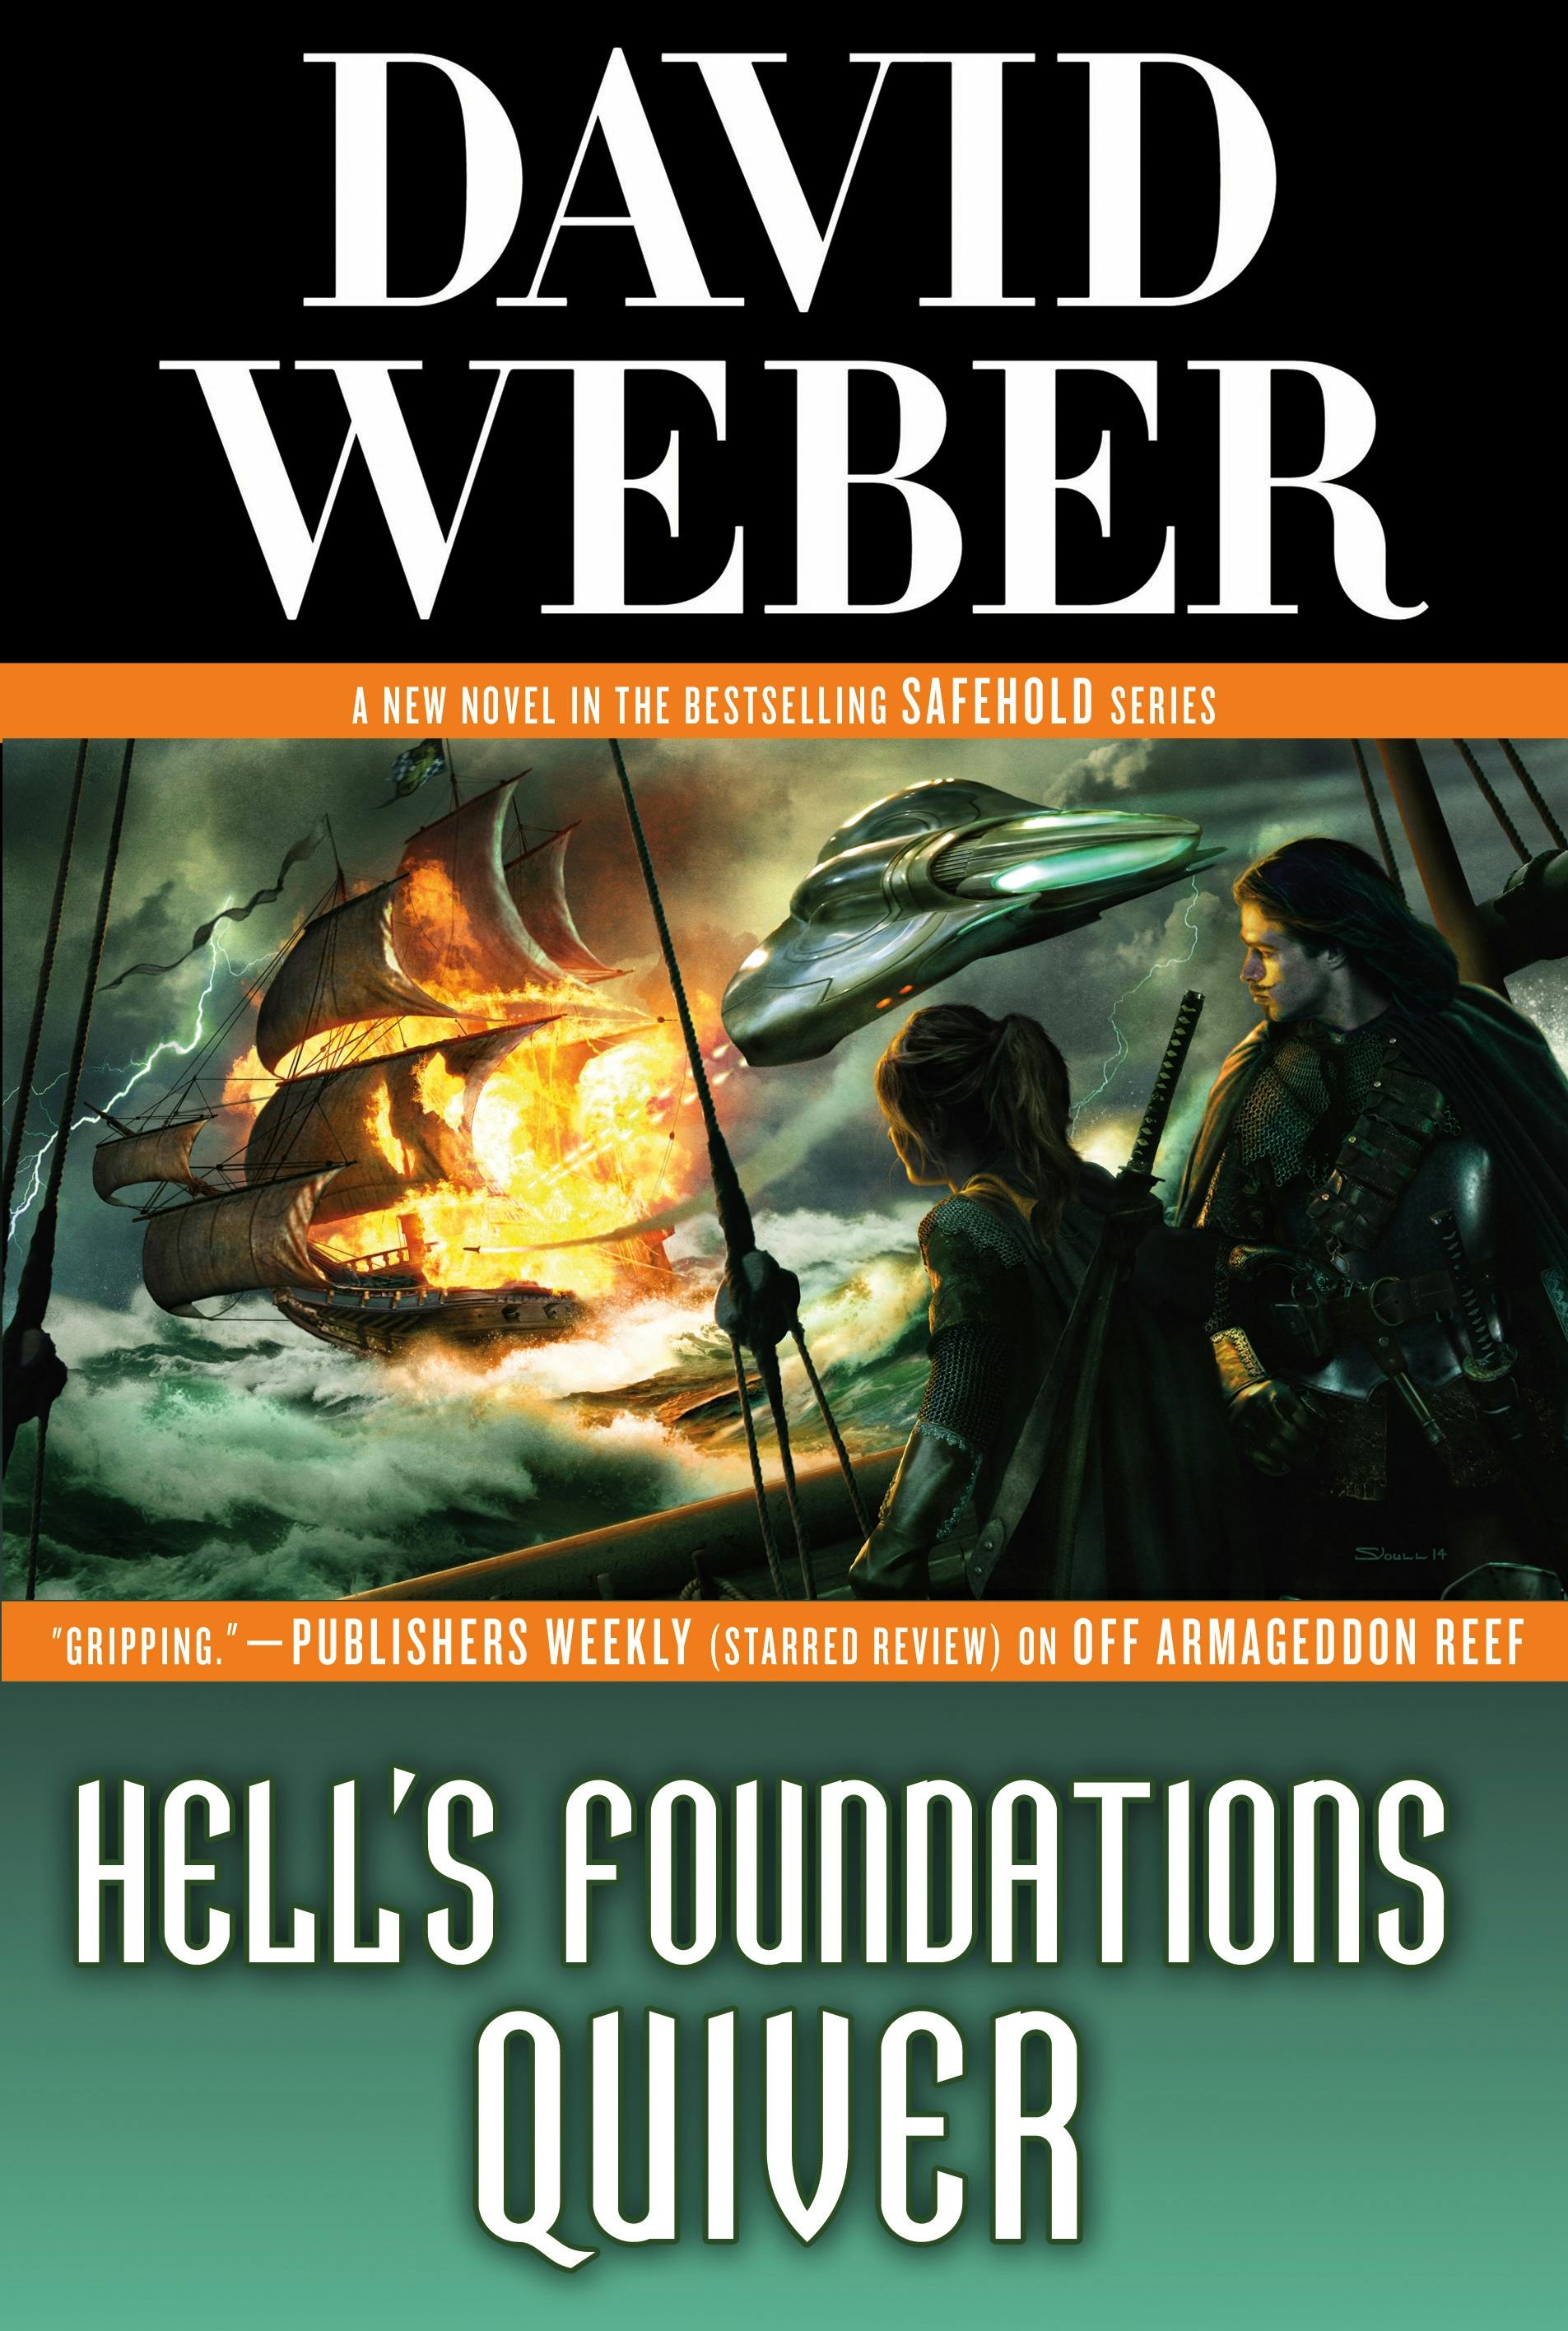 Cover for the book titled as: Hell's Foundations Quiver